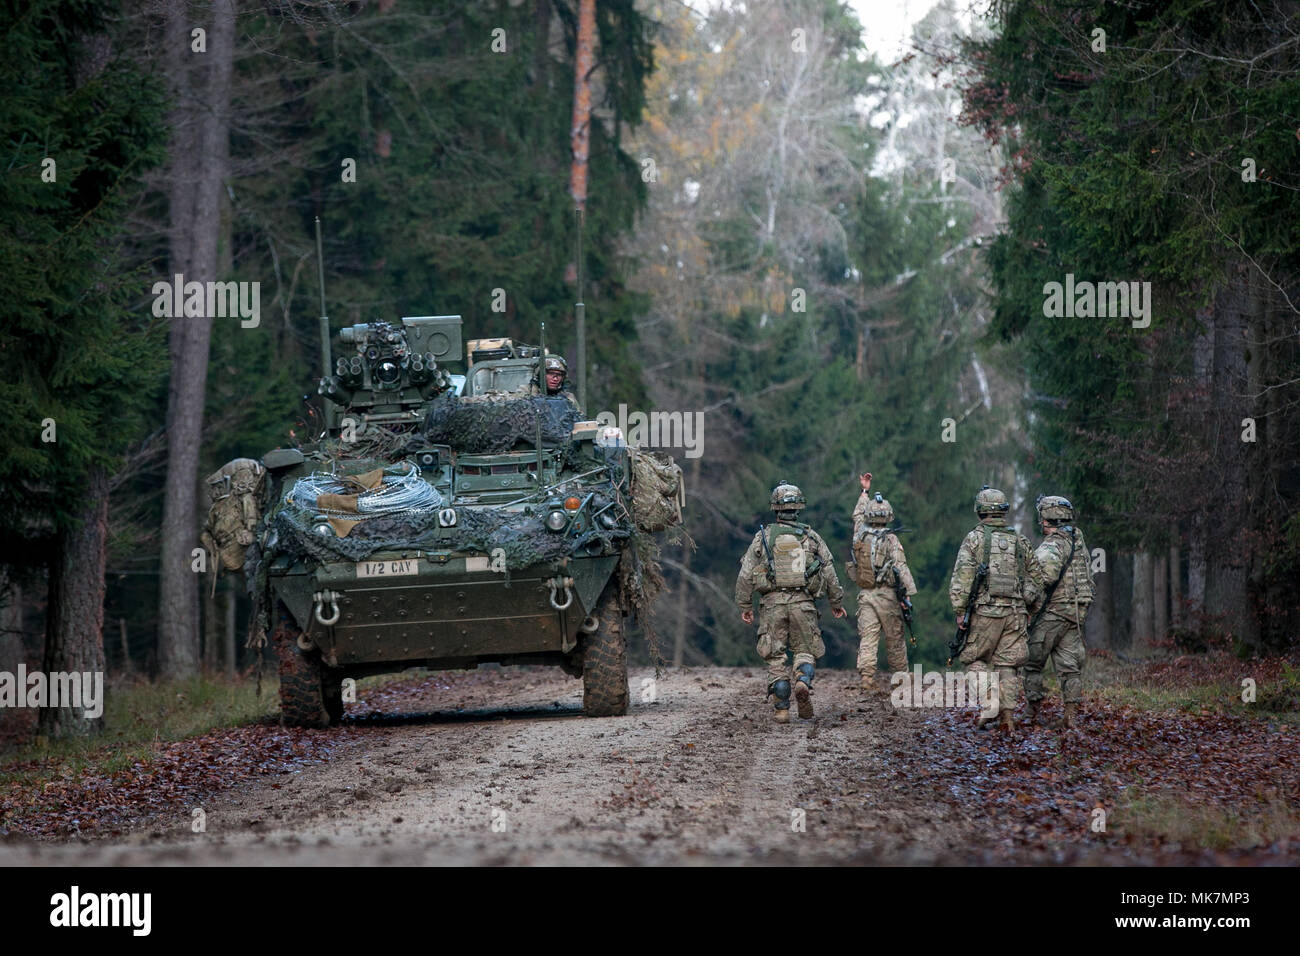 Soldiers from the 1st Squadron, 2nd Cavalry Regiment give the 'all-clear' to waiting vehicles to move forward and advance on mock enemy positions Nov. 18, 2017 during the Allied Spirit VII training exercise held in Grafenwoehr, Germany. The U.S. Army, along with its allies and partners, continues to forge a dynamic presence with a powerful land network that simultaneously deters aggression and assures the security of the region. Approximately 3,700 service members from 13 nations gathered in 7th Army Training Command’s Hohenfels Training Area in southeastern Germany to participate in the seven Stock Photo